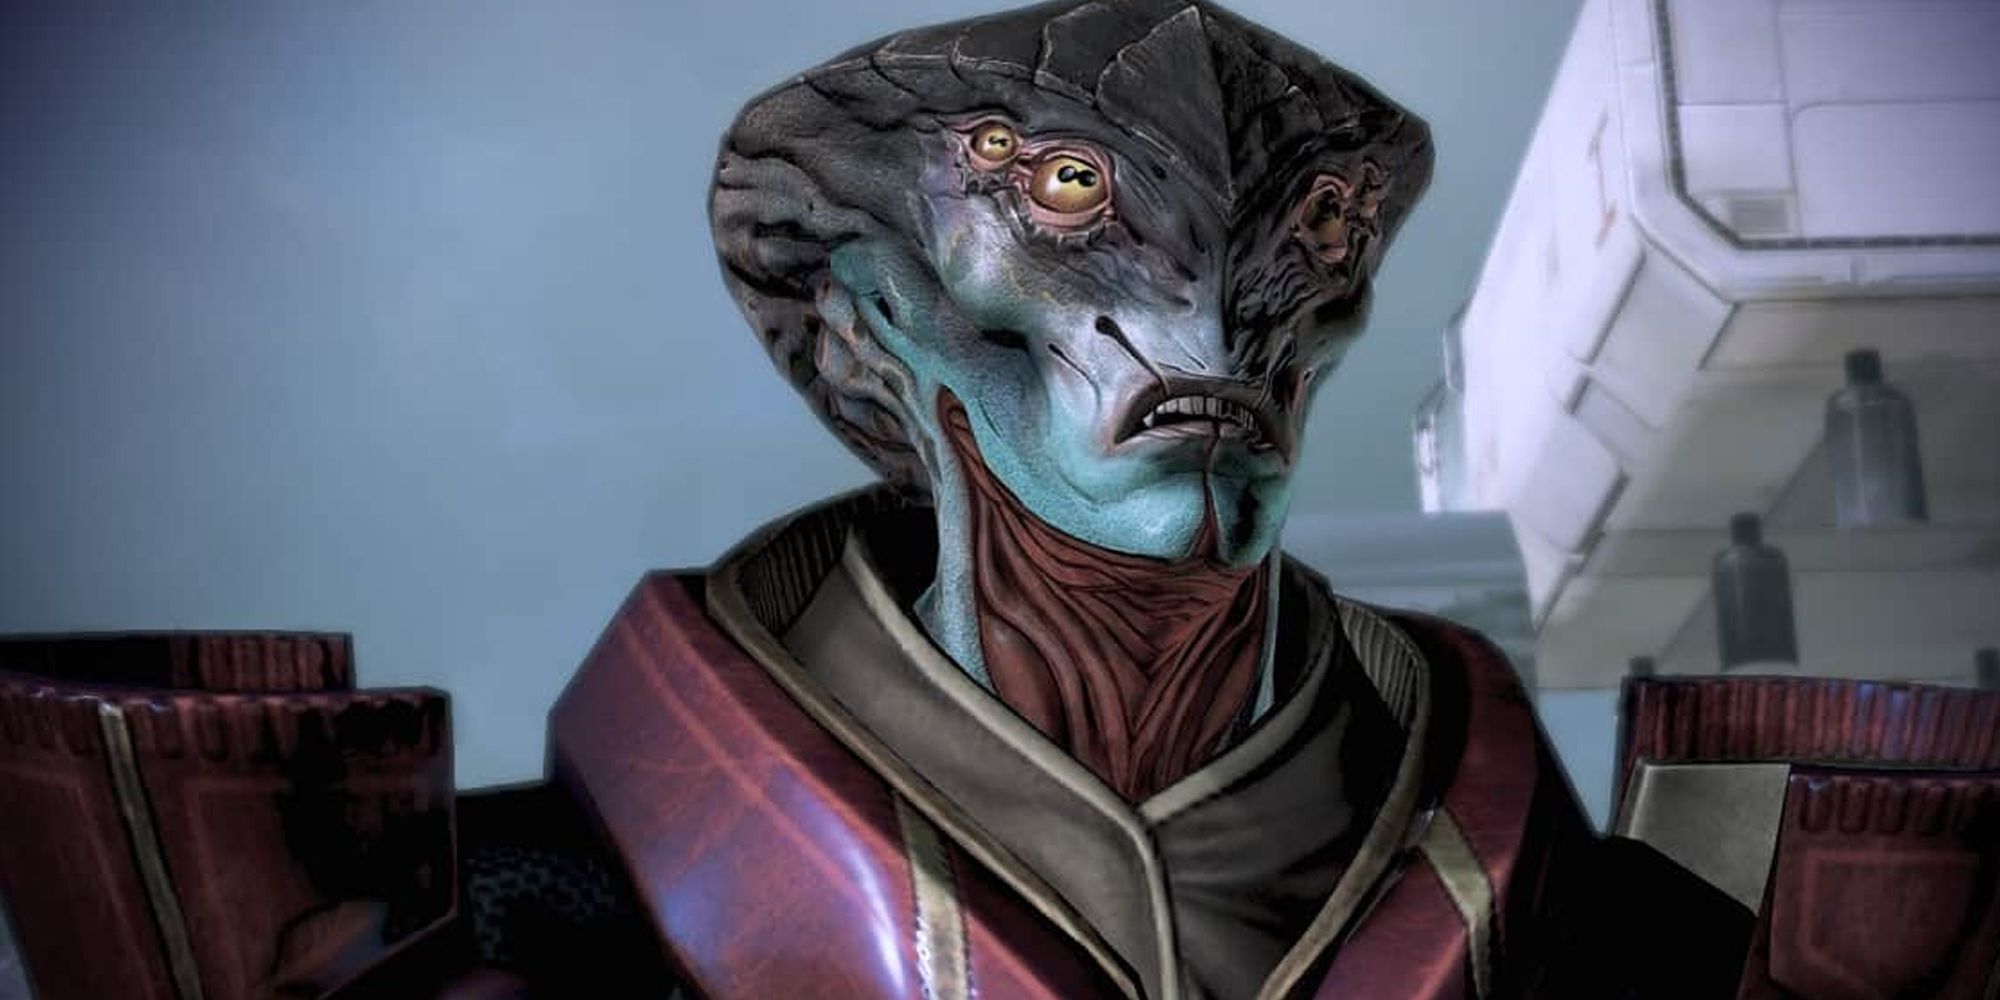 The prothean Javik awakes in the present day in Mass Effect 3's From Ashes DLC.